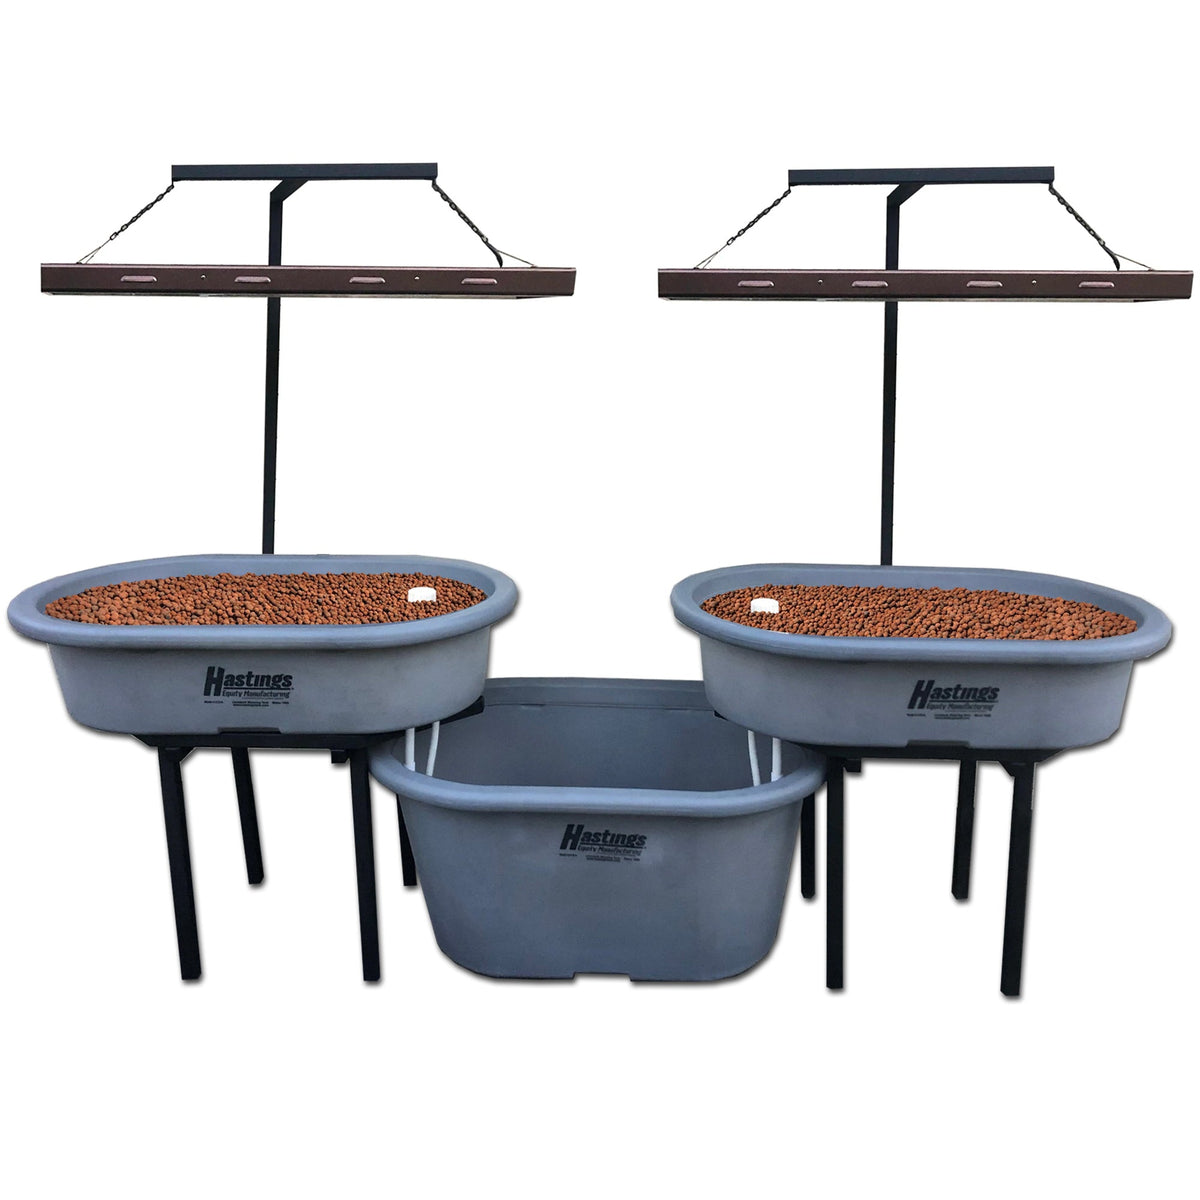 A set of three Go Green Double Aquaponics Systems on a stand, suitable for use as a grow bed system.